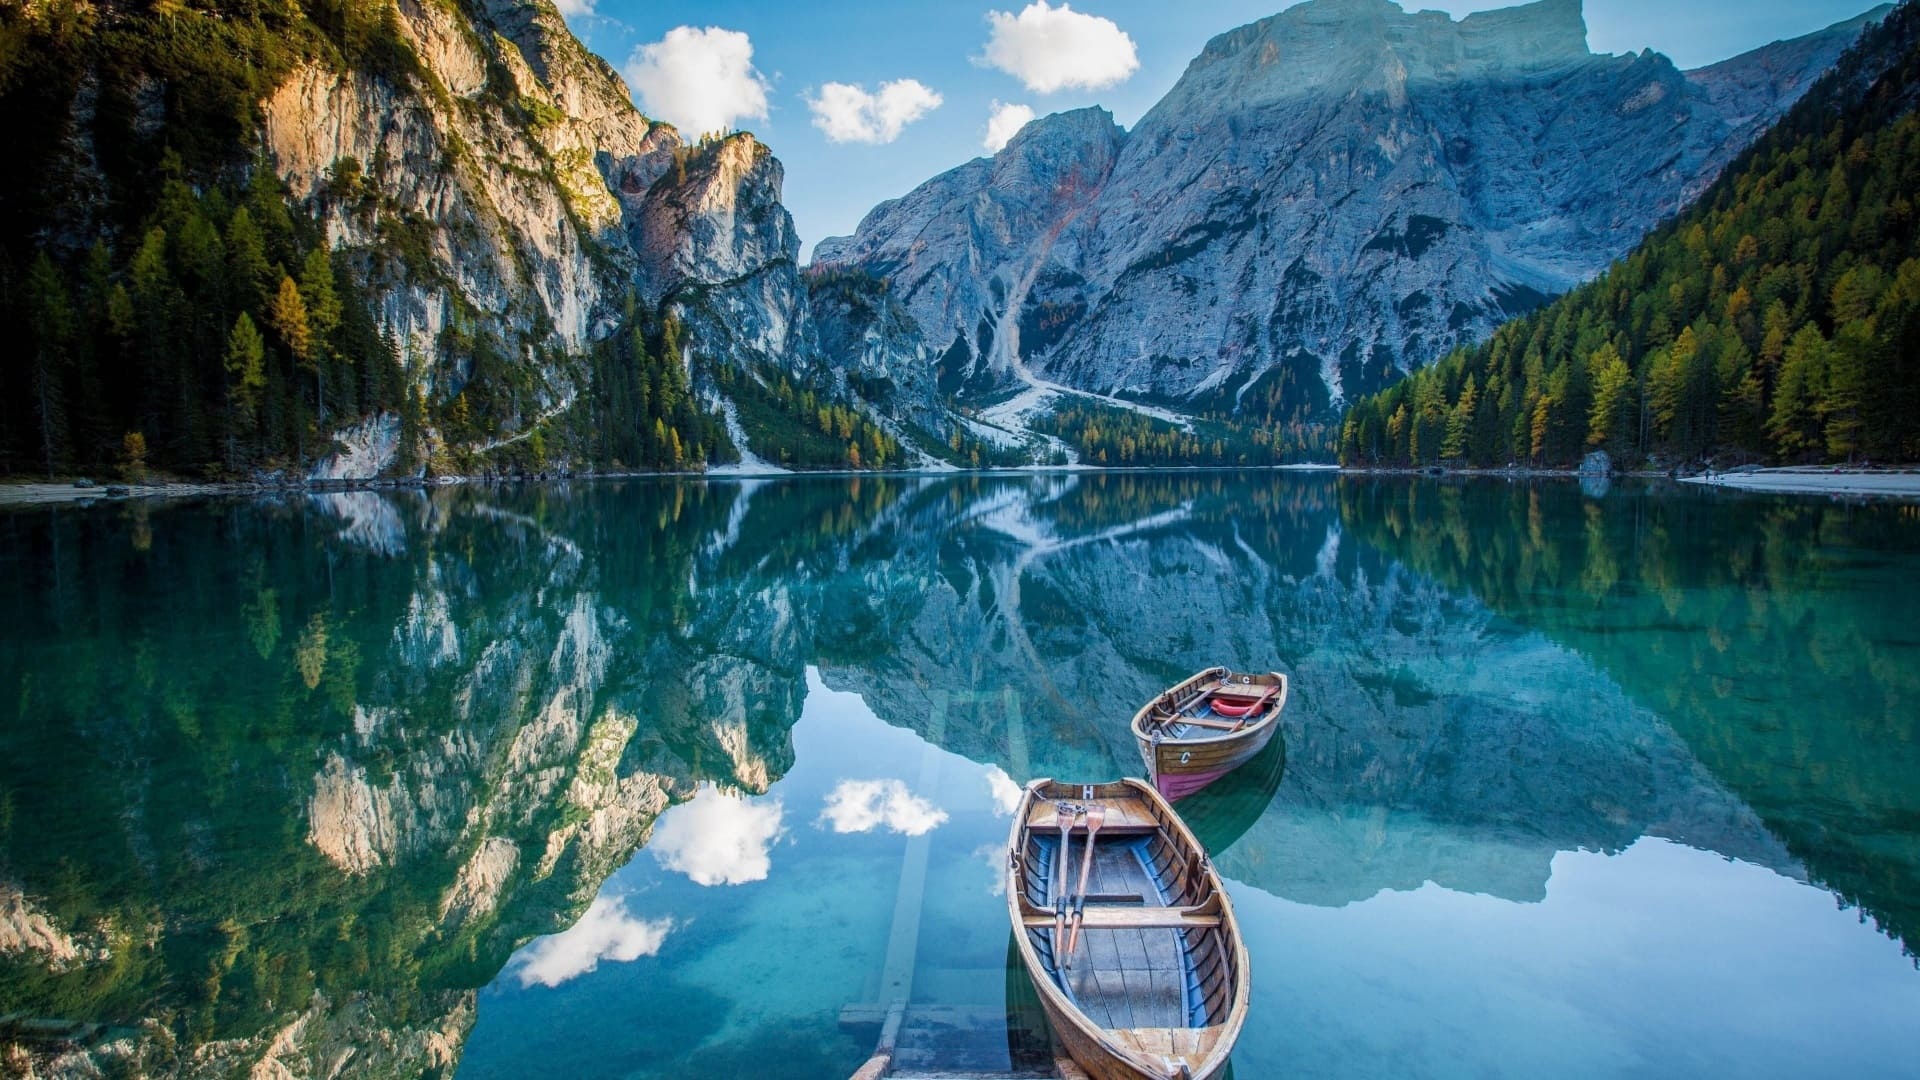 Landscape: Lake Braies, The Pragser Wildsee, Amazing water reserve in the Dolomites, Italy. 1920x1080 Full HD Background.